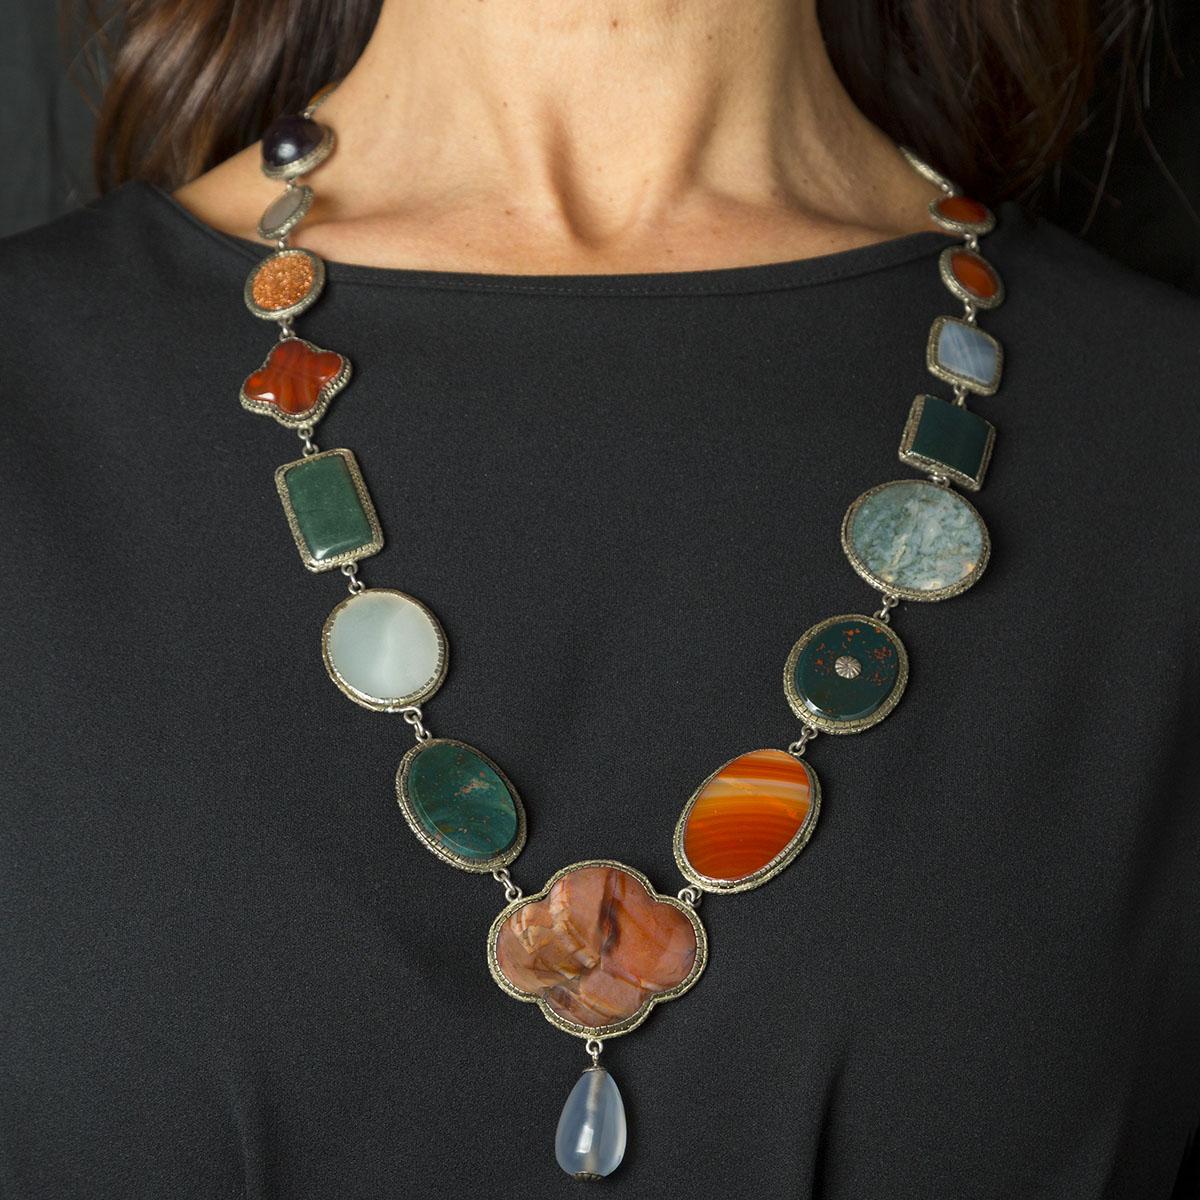 1820s very rare Victorian-Scottish 925 silver agate and semiprecious stone necklace. Each agate-stone is unique and boasts various earthy colors and patterned layers that form naturally. Scottish jewelry grew in popularity in the mid-1800s due to